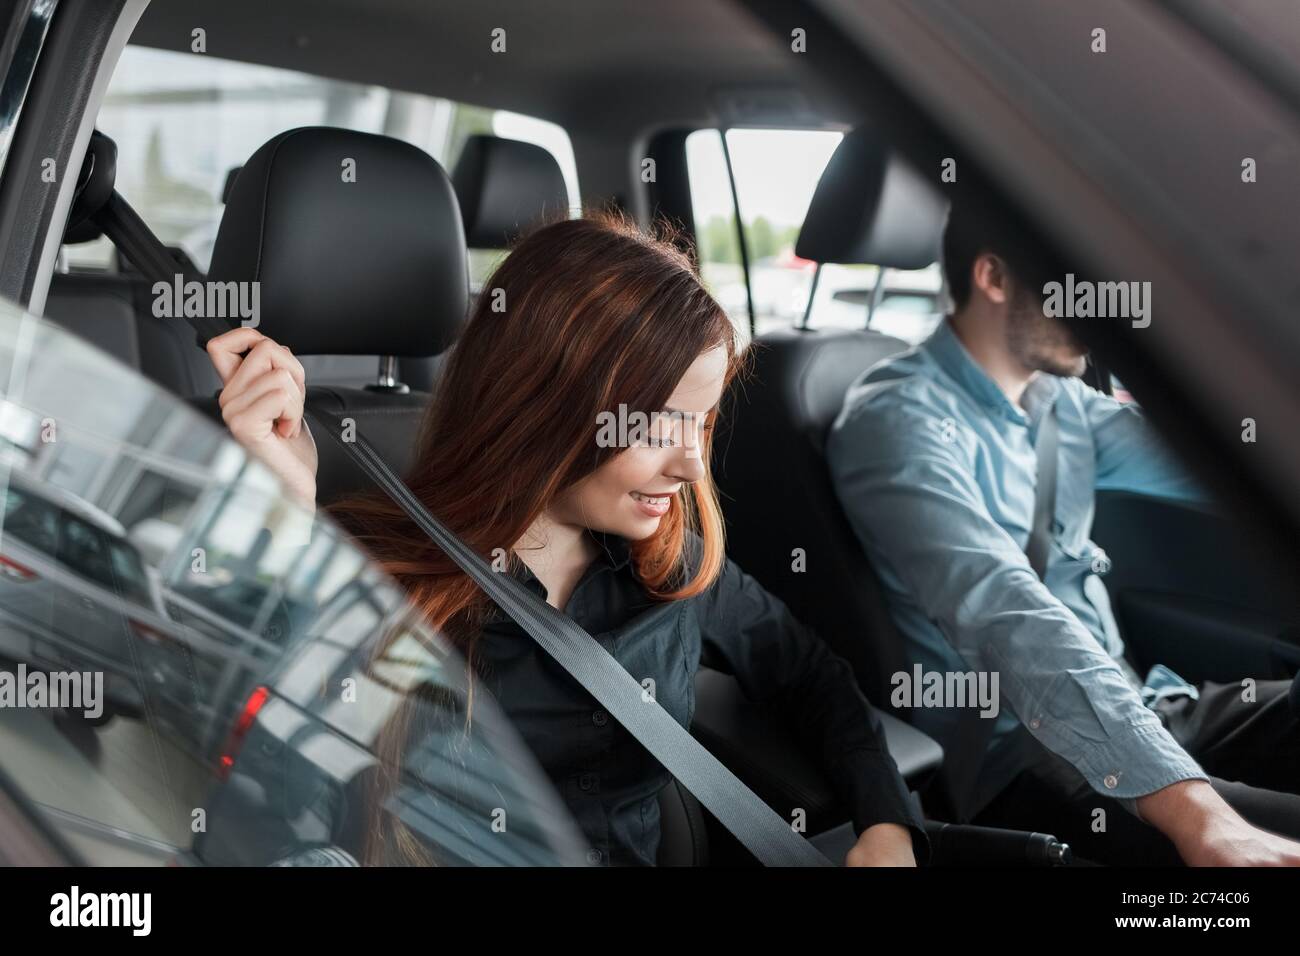 Woman fastens her seat belt before starting a test drive at a car dealership Stock Photo